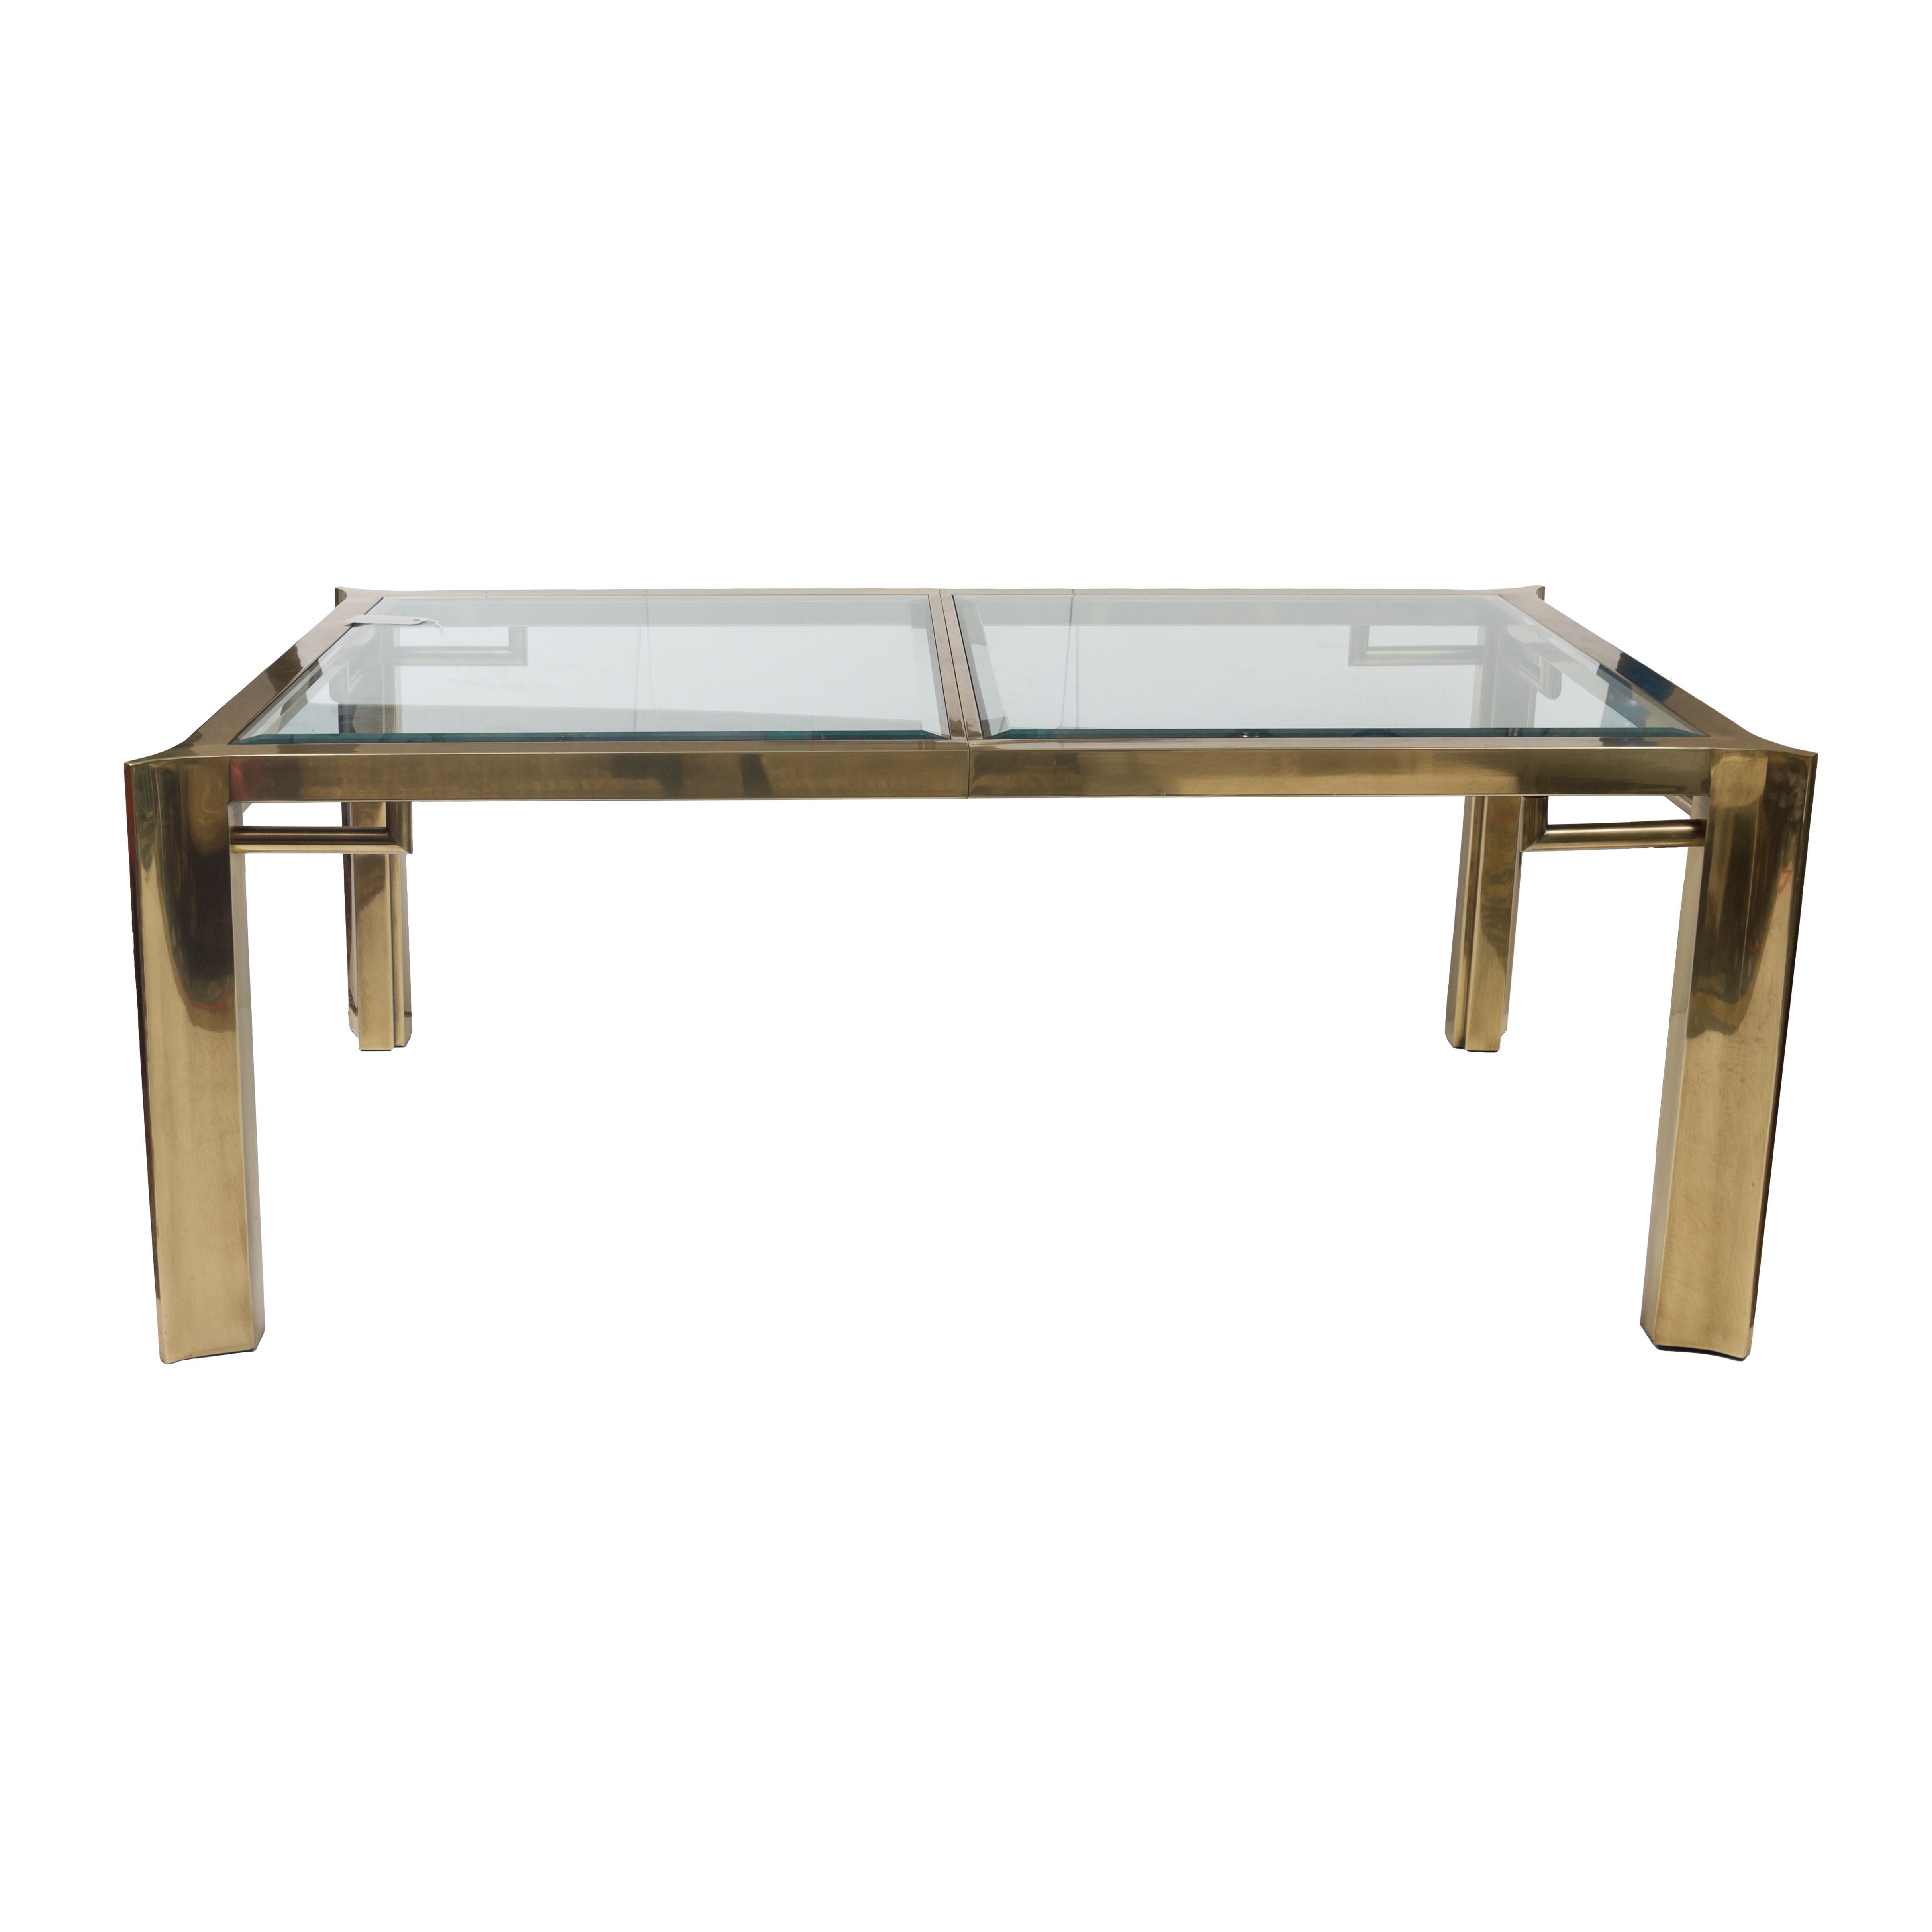 Mastercraft Dining Room Table For Sale